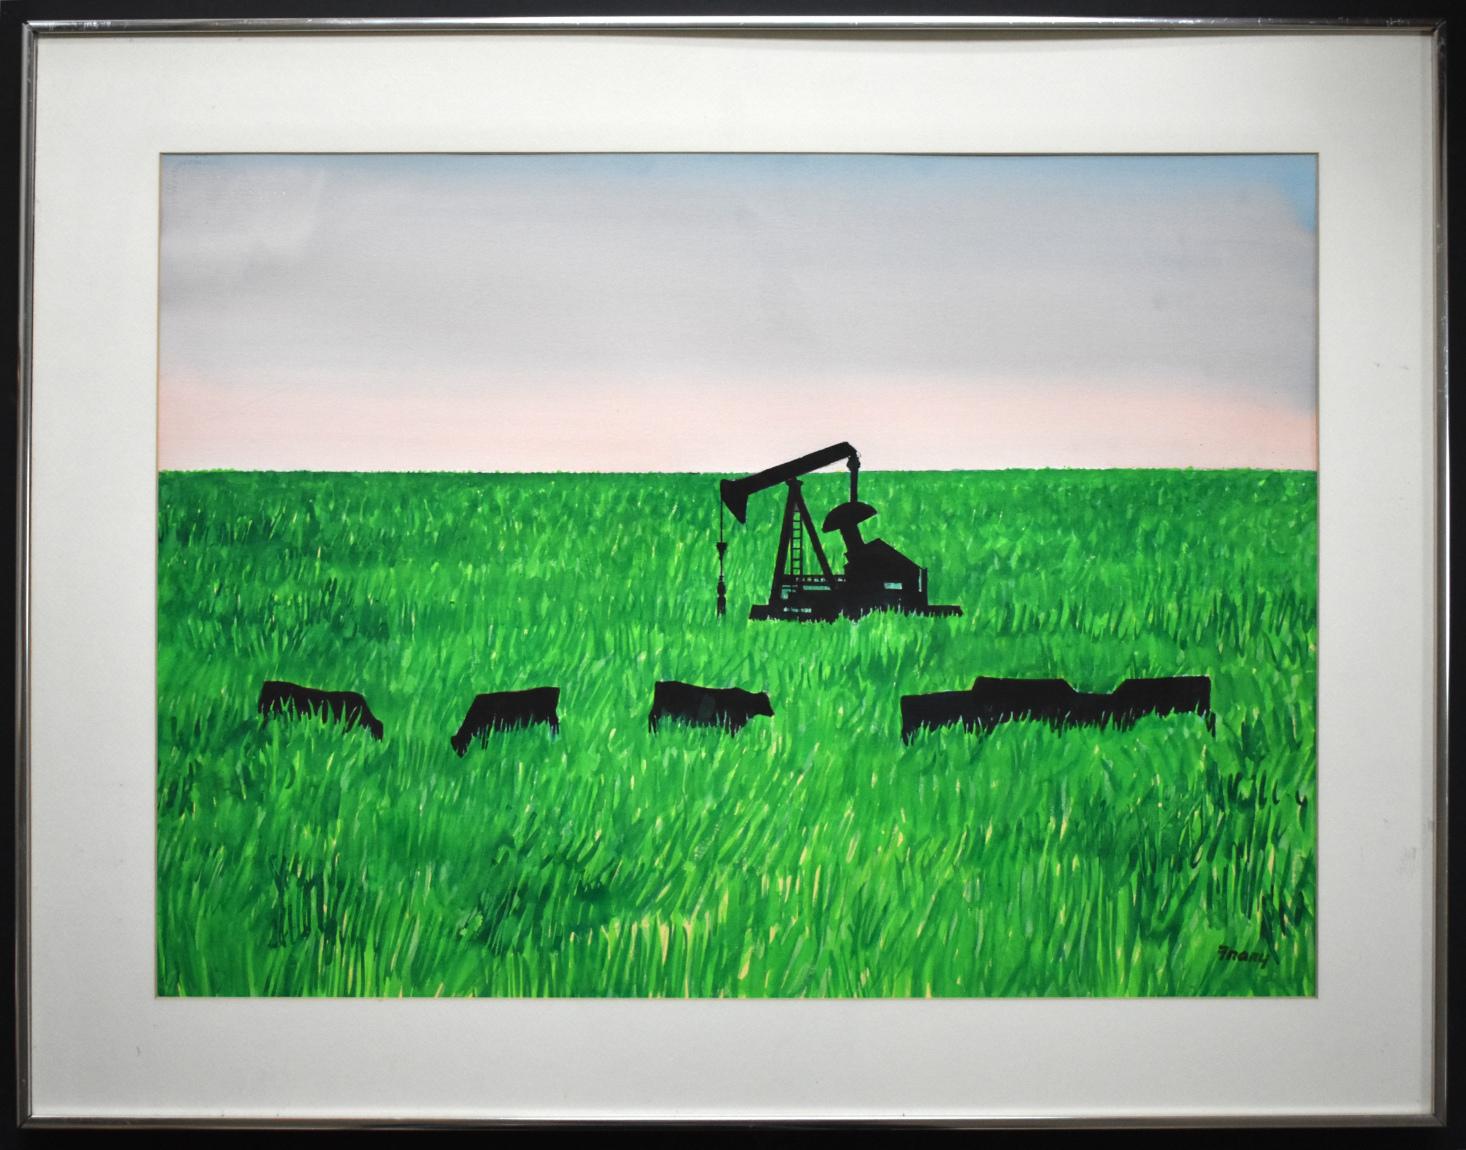 Michael Frary Landscape Art - "ANGUS AND PUMPJACKS" TEXAS WATERCOLOR MID CENTURY